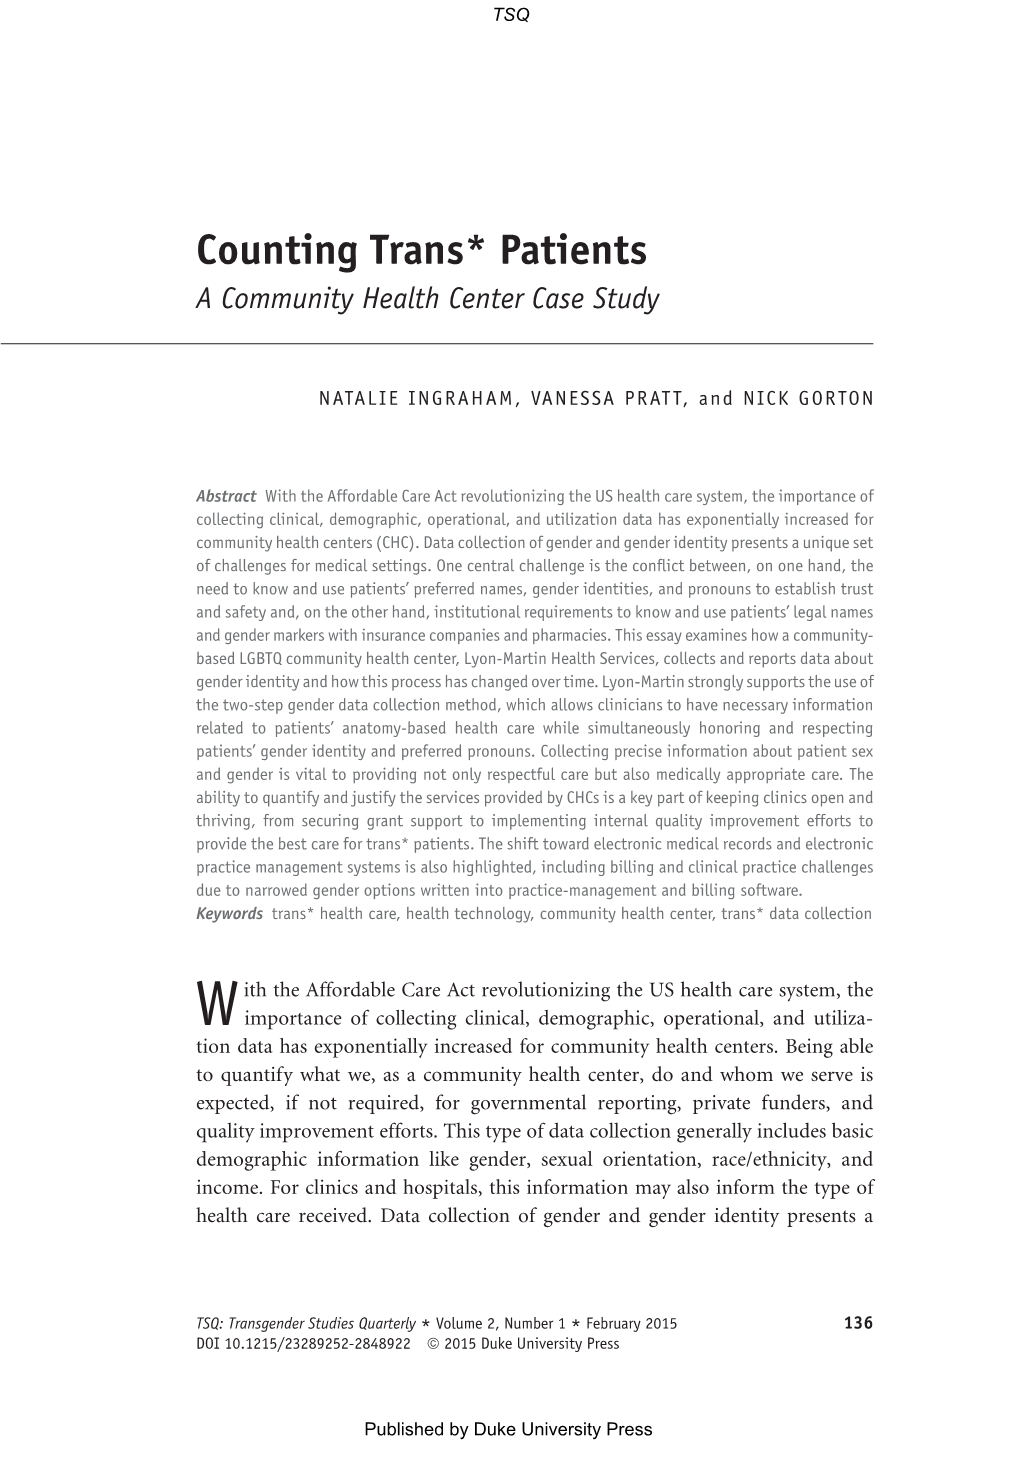 Counting Trans* Patients a Community Health Center Case Study